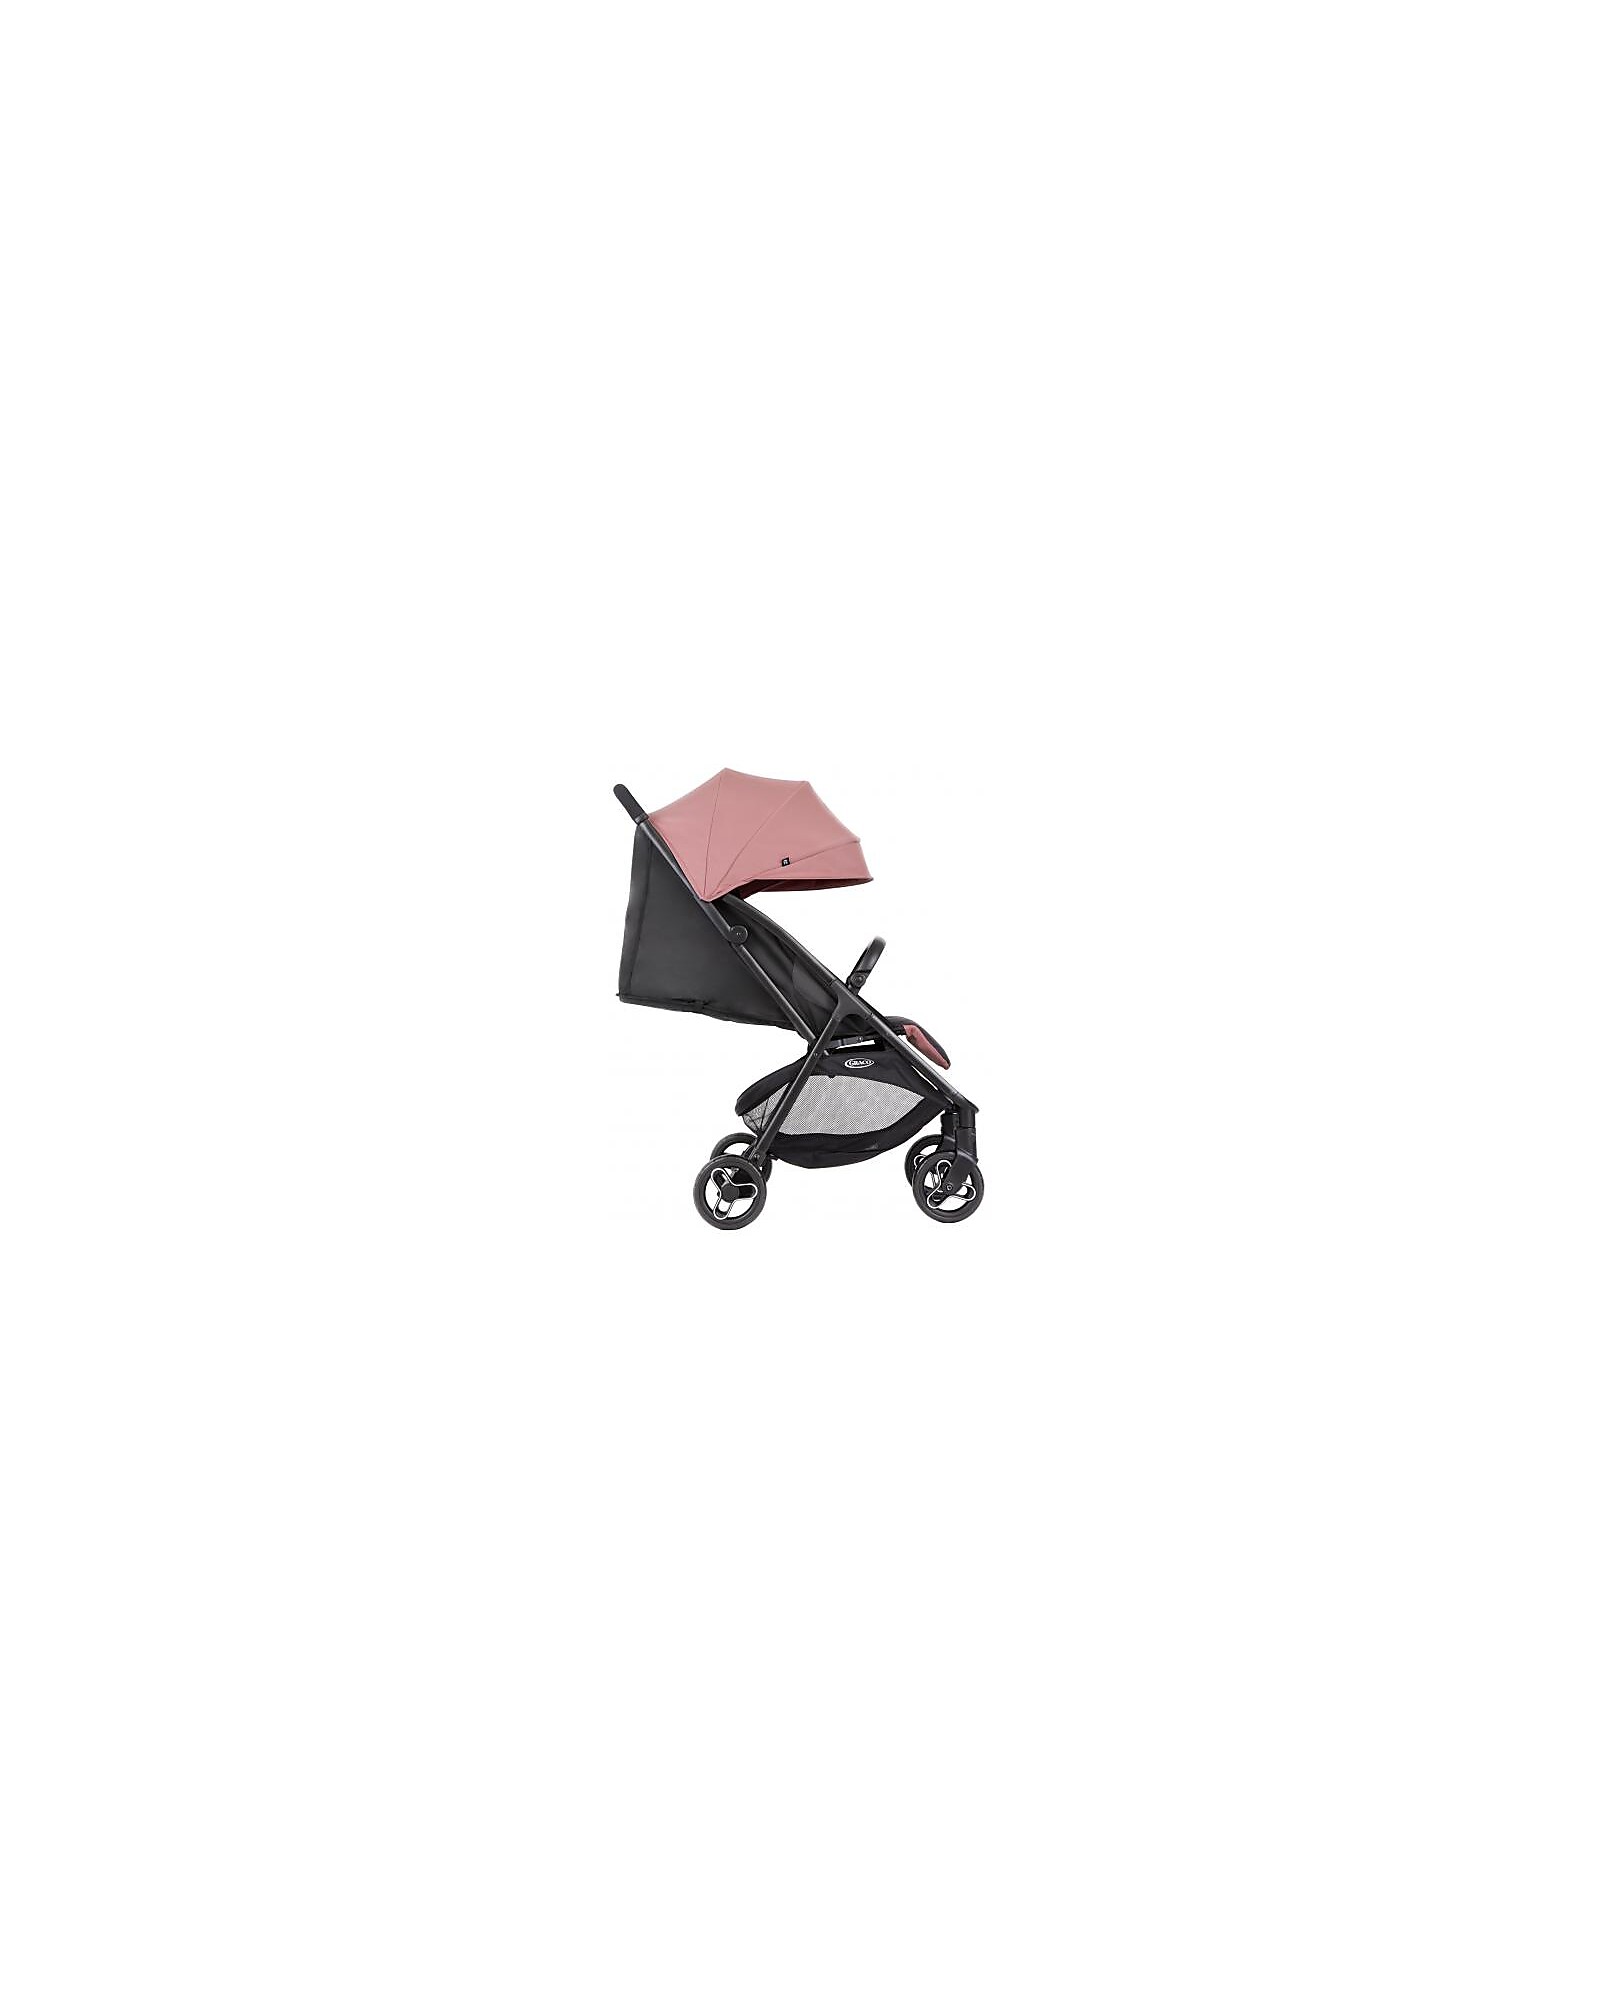 Hand Muff for Pushchair Stroller Baby Comfort Graco Quinny Britax Bugaboo  Jane